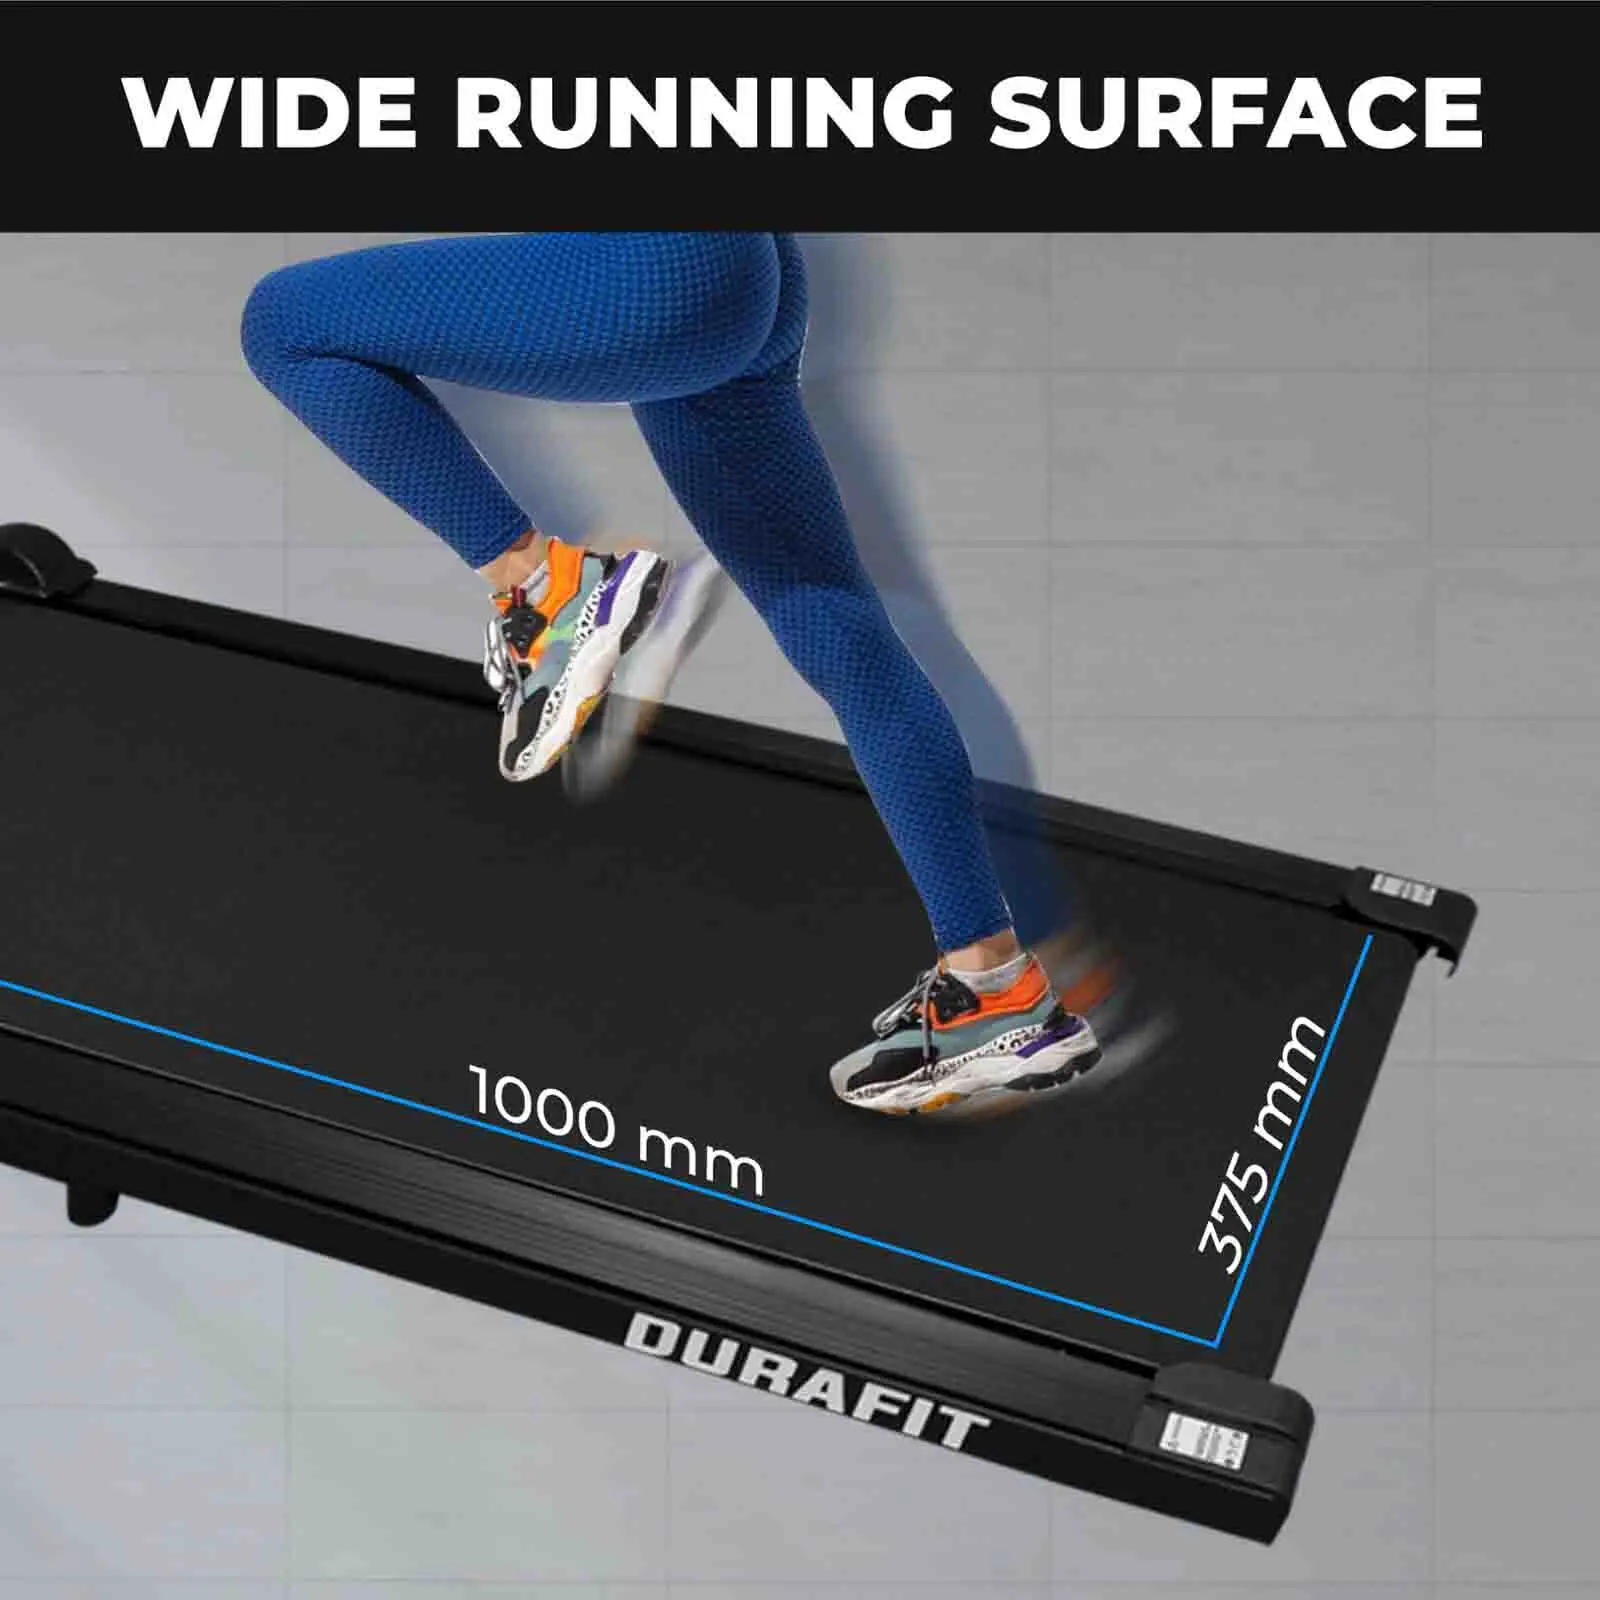 Durafit Compact Black Treadmill with wide running surface